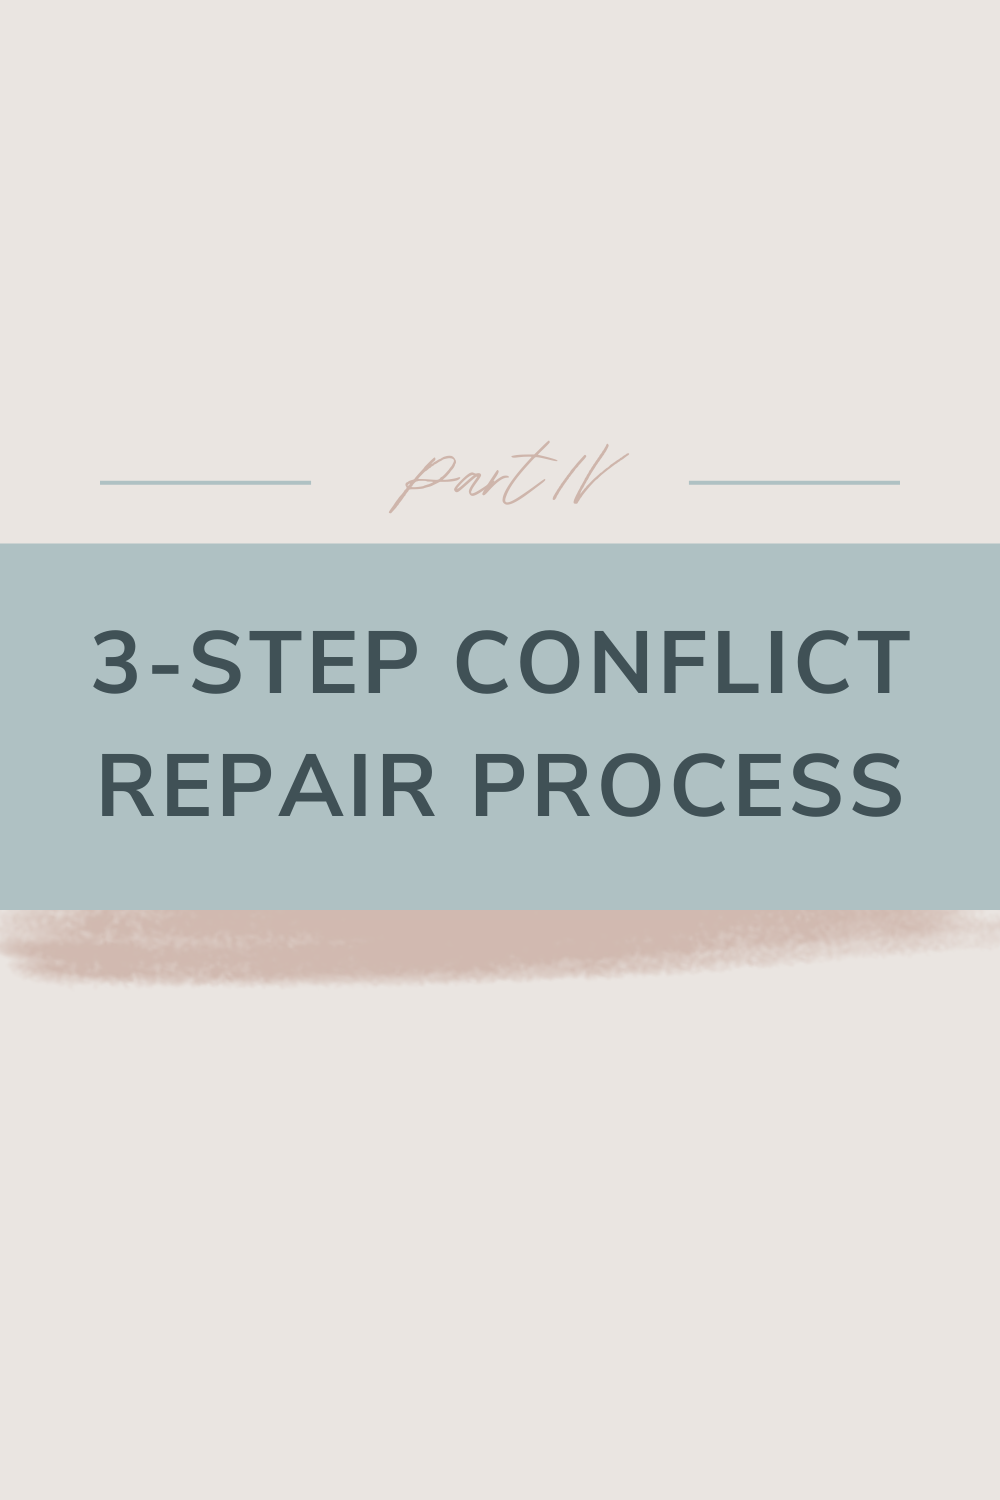 3-Step Conflict Repair Process | Do you ever find yourself fighting about the same darn things with your partner? Us too! Conflict is normal and inevitable in relationship. But how you work through it changes drastically on the health of the couple. Check out this blog to learn the three step process to heal conflict now and forever. Cheers!